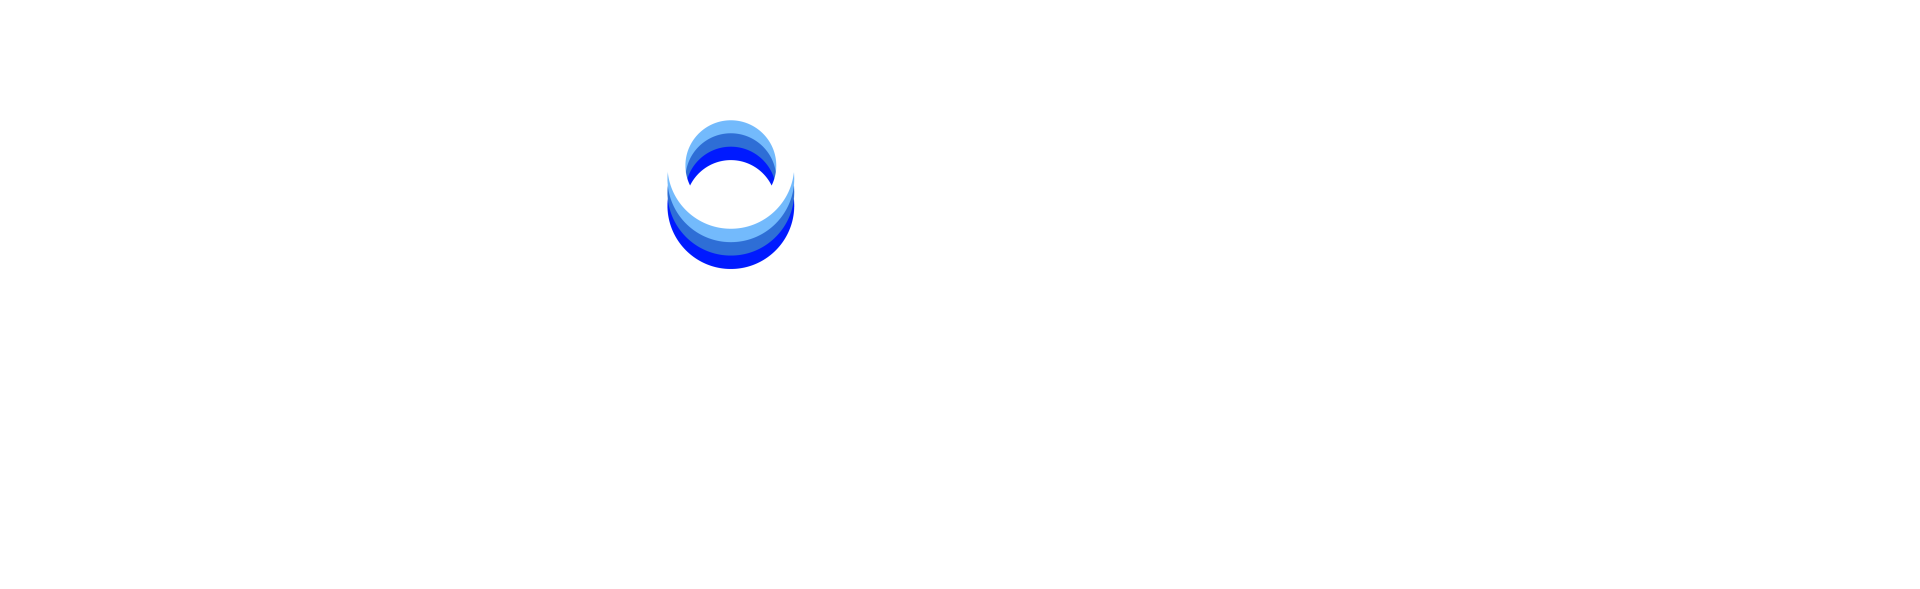 Luno Presents All Points East